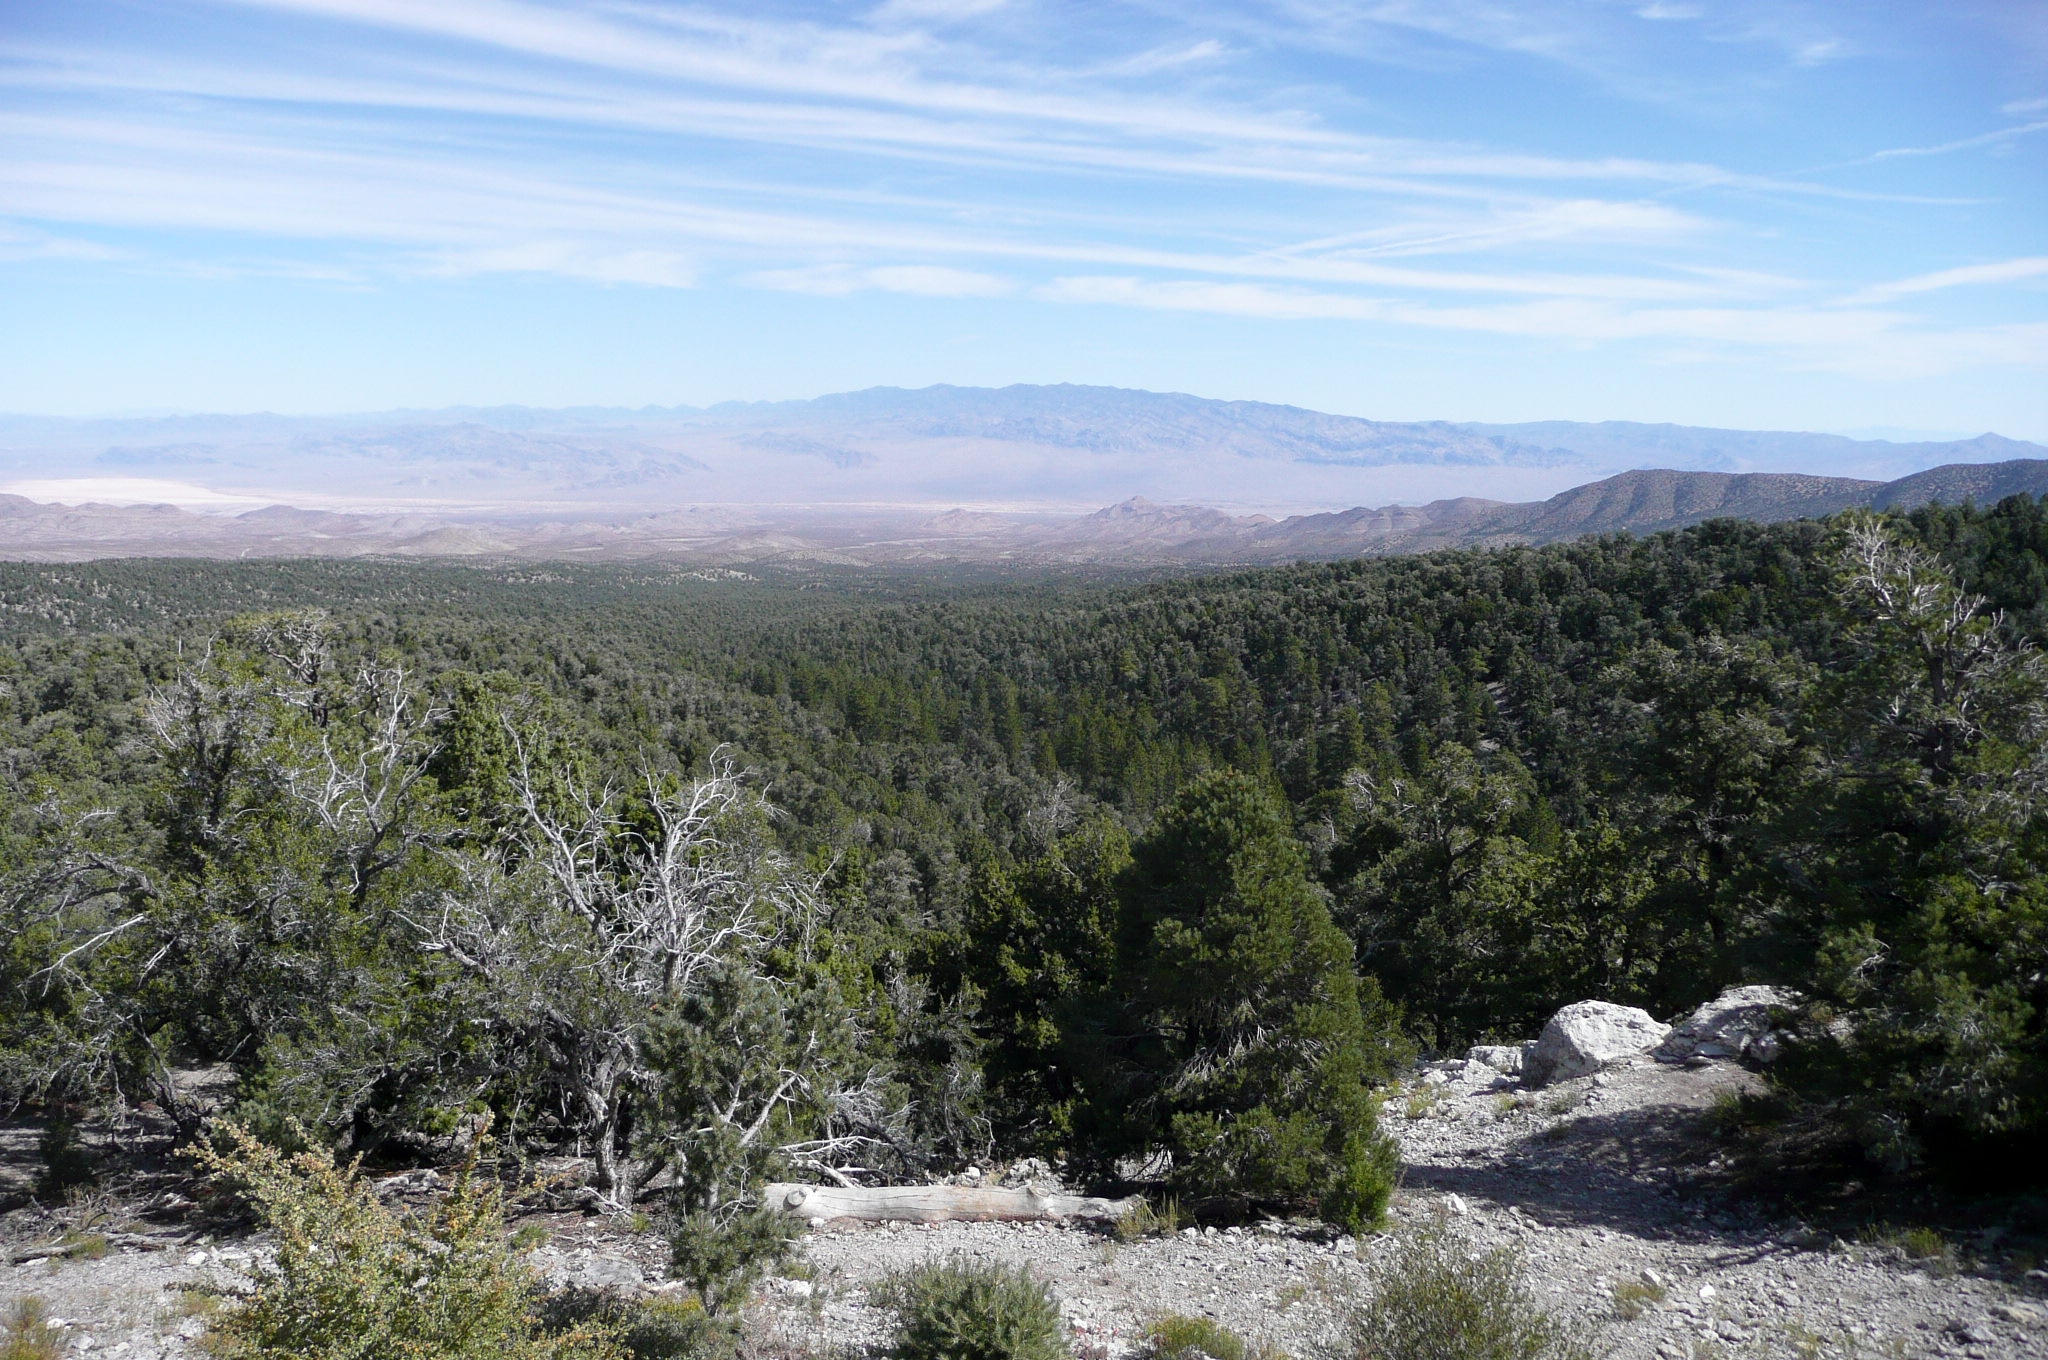 Mt Charleston and Lee Canyon area is connected by Hwy 158